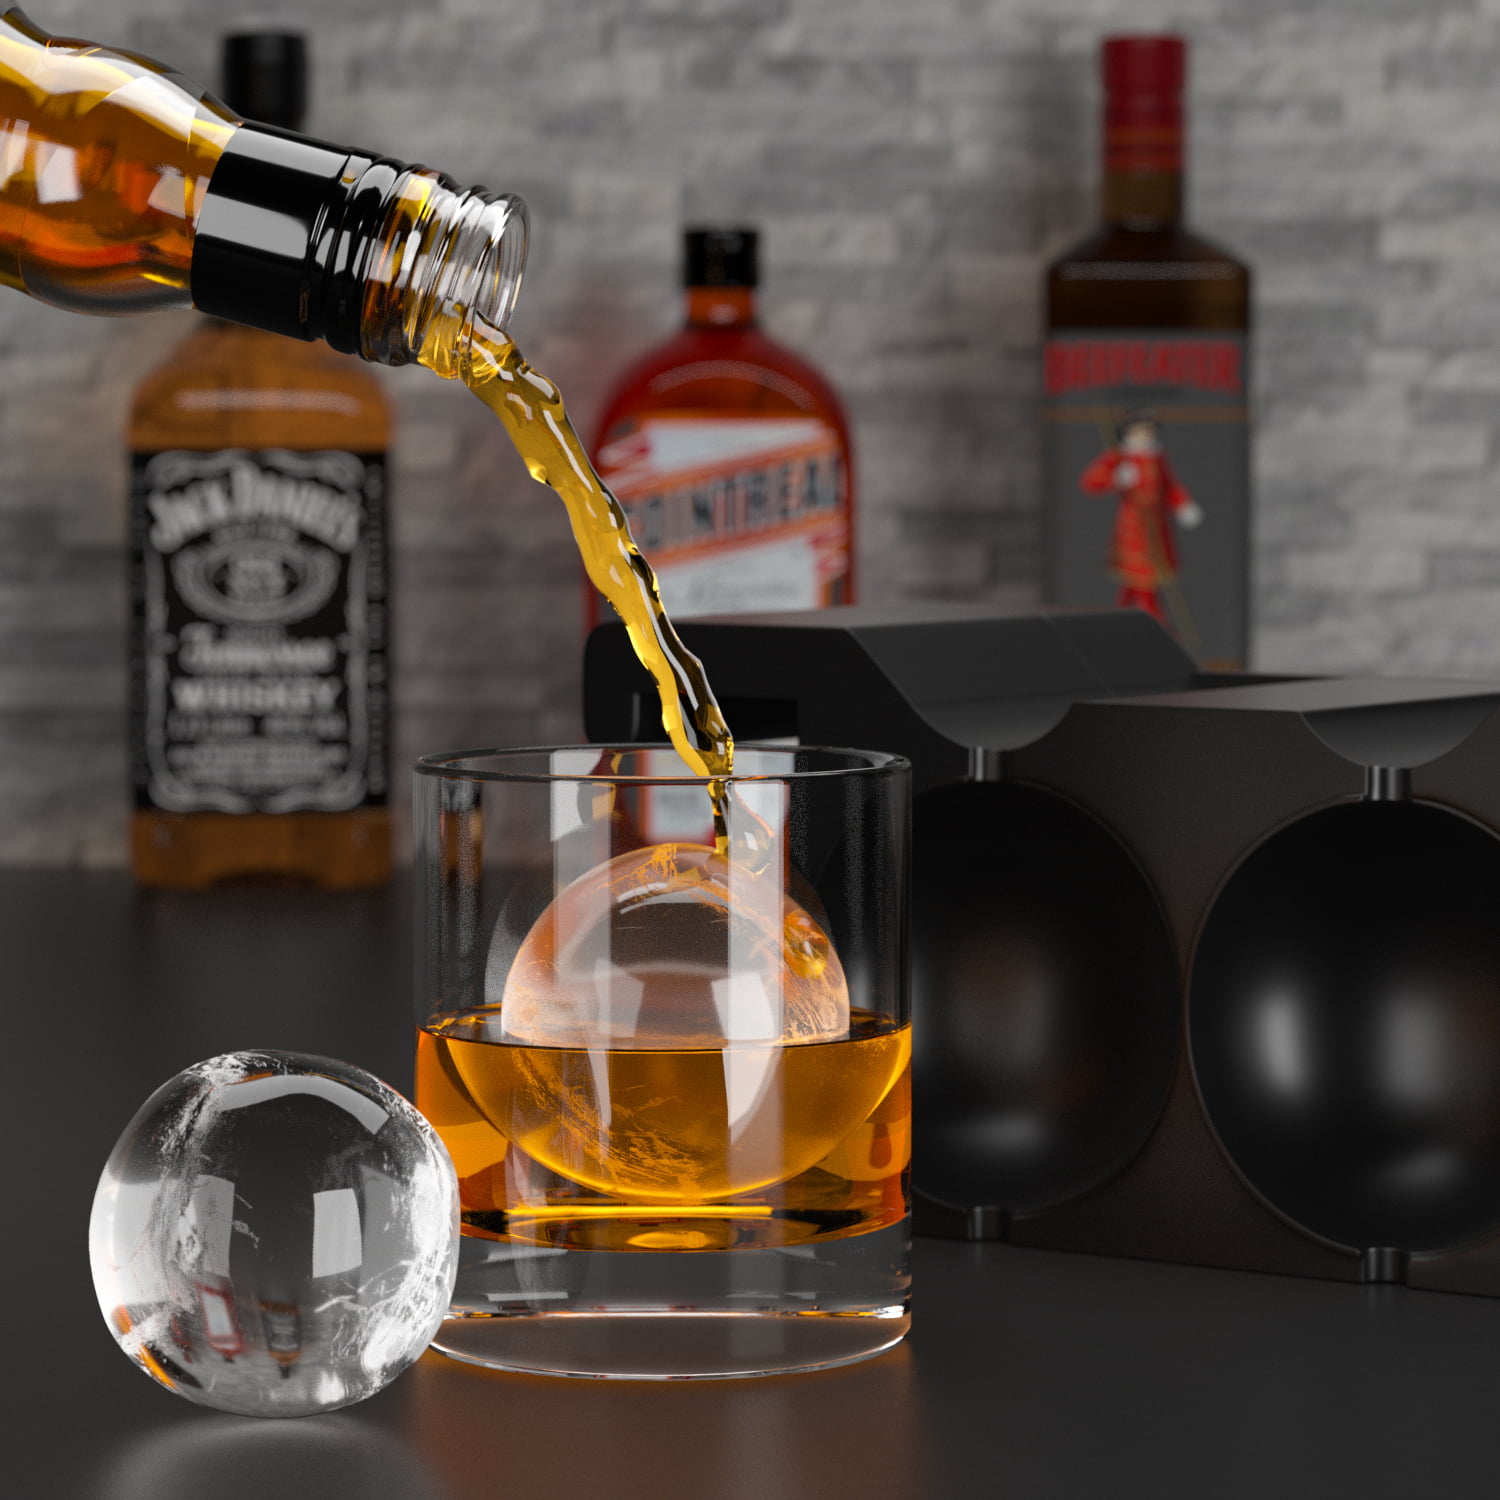 TINANA Crystal Clear Ice Ball Maker, 4 Cavity Large Clear Ice Balls Form, 2.5” Round Ice Sphere Trays for Whiskey, Cocktail, Brandy, Bourbon